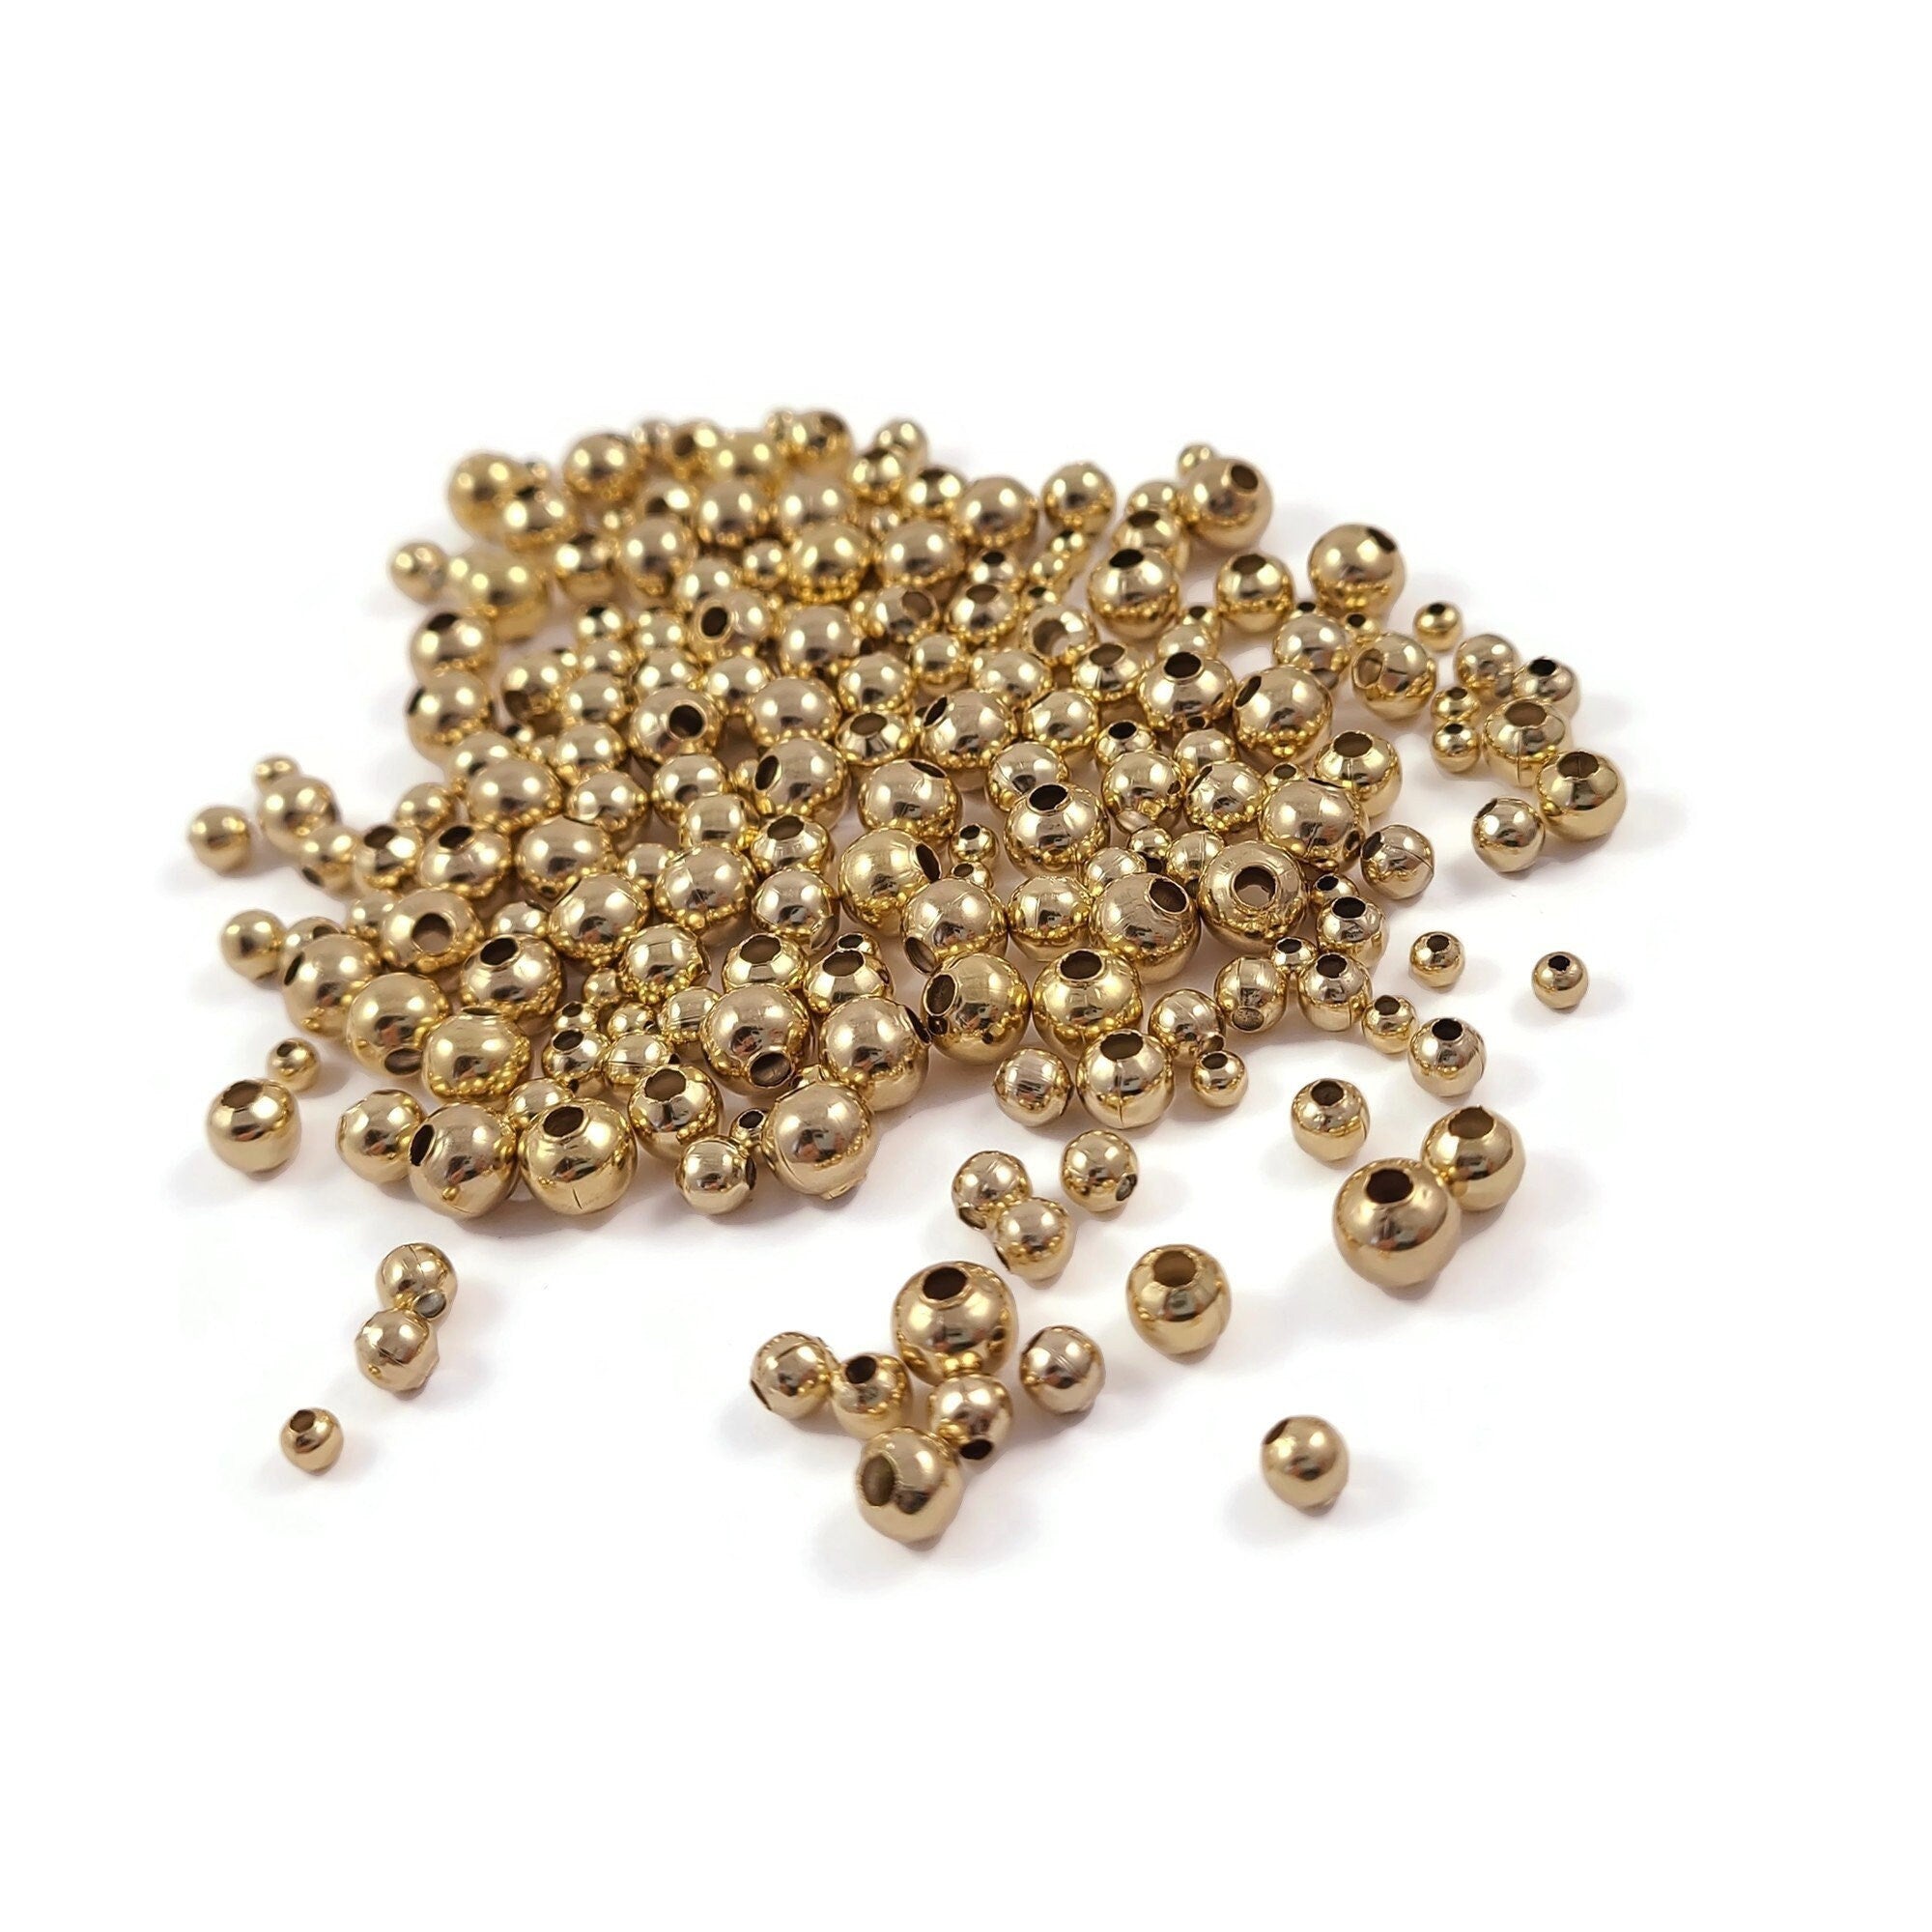  Gold Plated Heart Shape Beads, 30pcs Gold Heart European Small  Hole Spacer Beads Heart Beads Spacer Gold for Jewelry Bracelet Necklace  Making